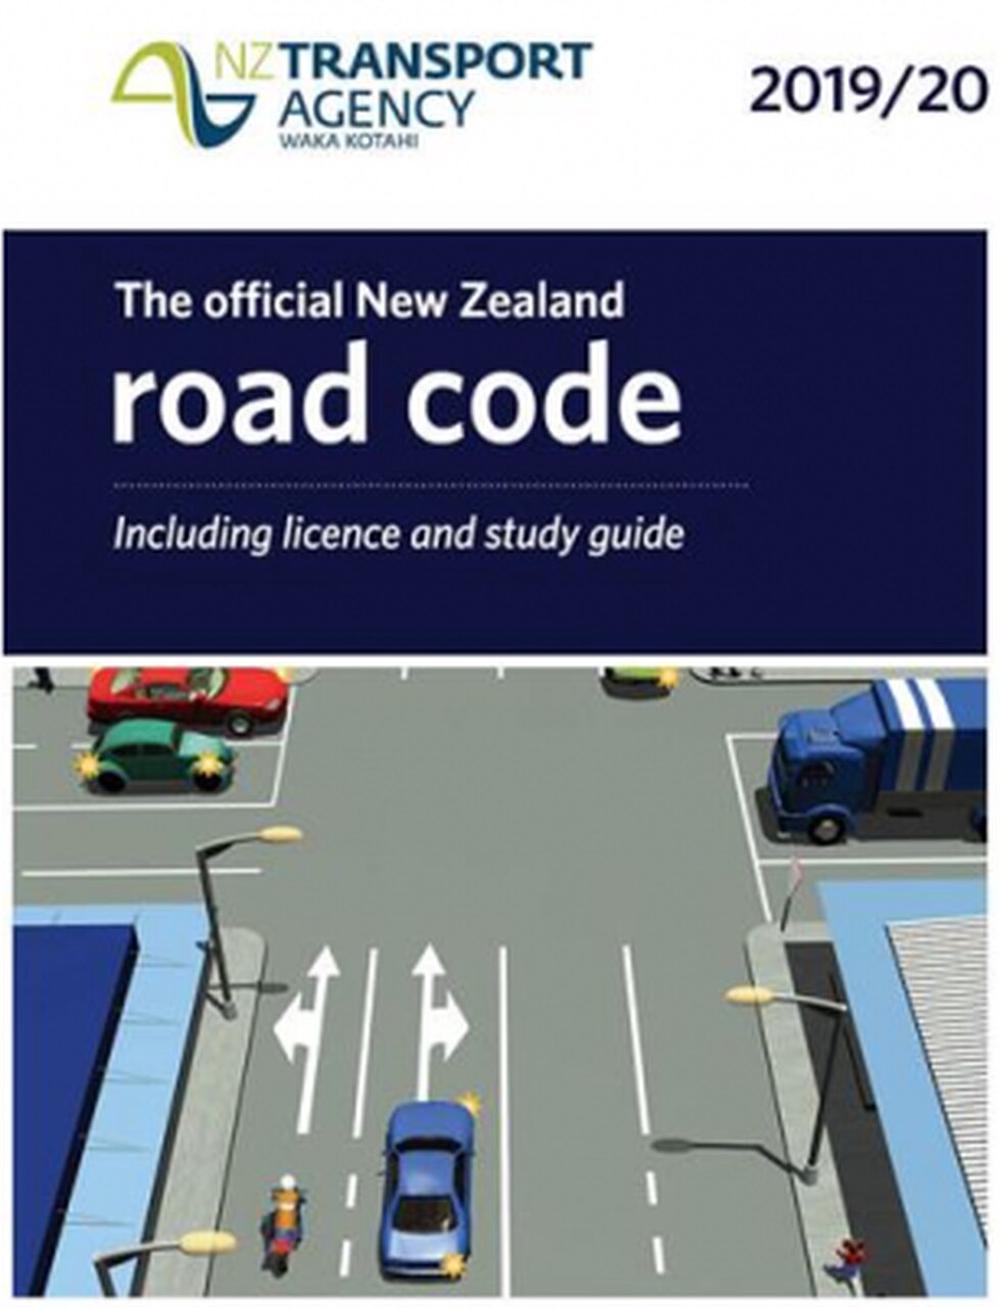 NZ Road Code  Drive - Drive - The official way to drive. Drive